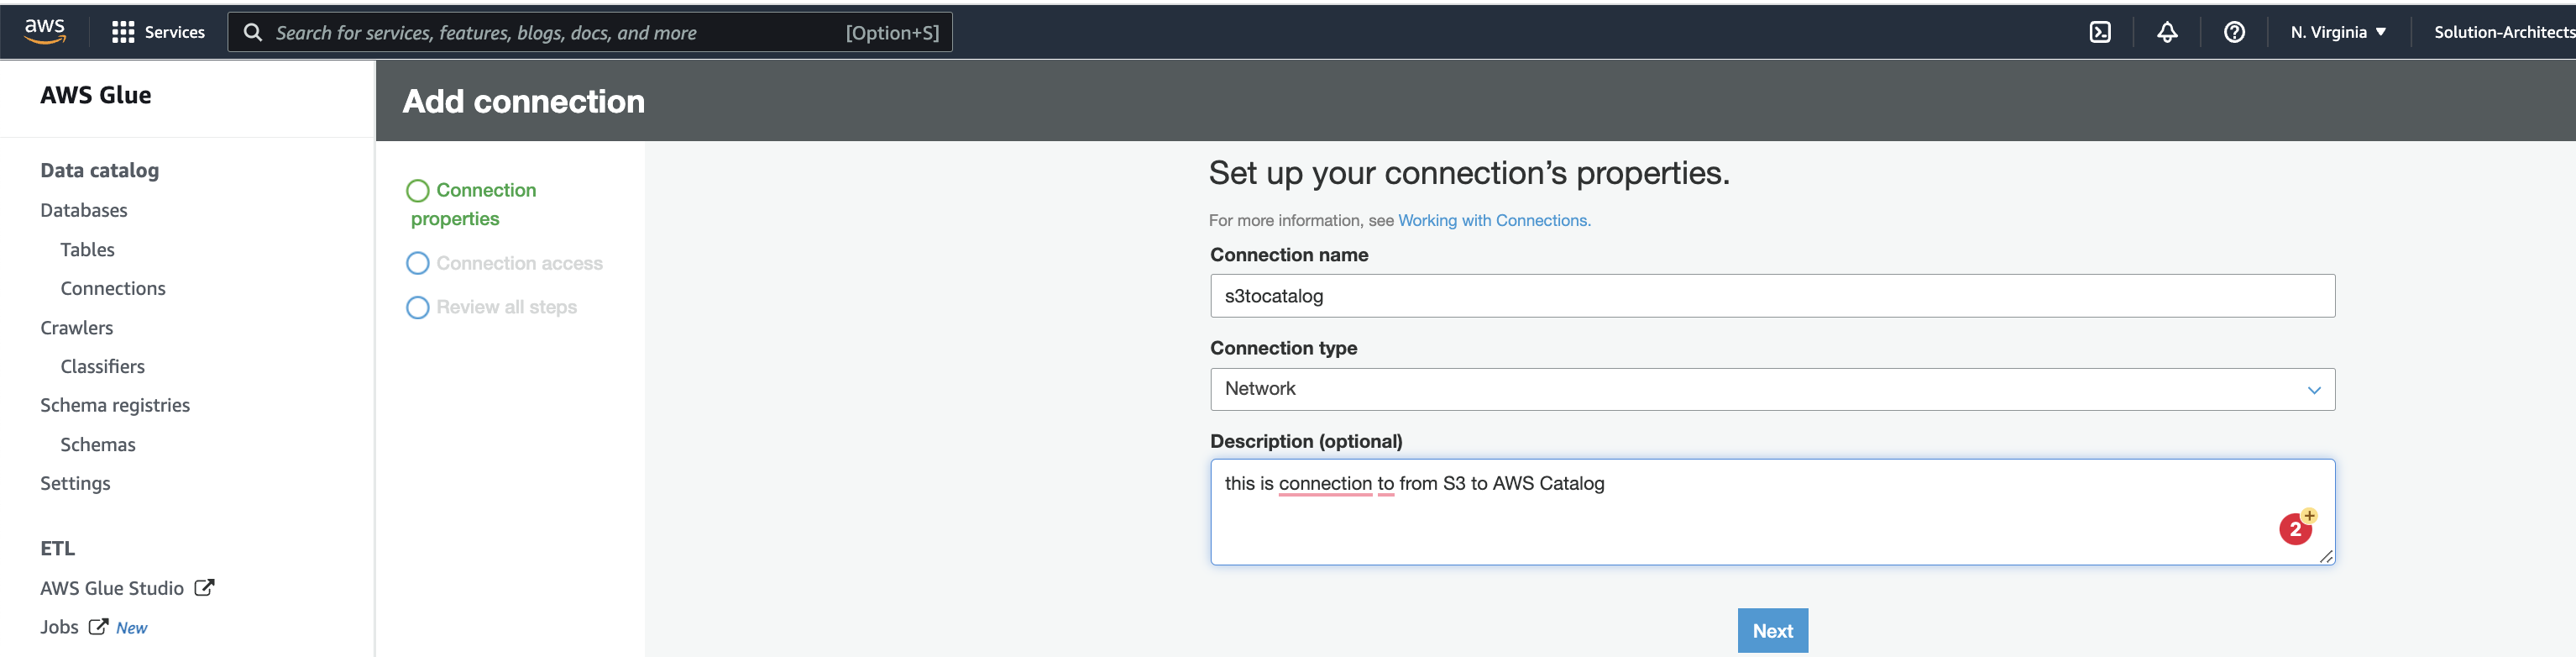 10.AWS Glue s3tocatalog Connections 1.png